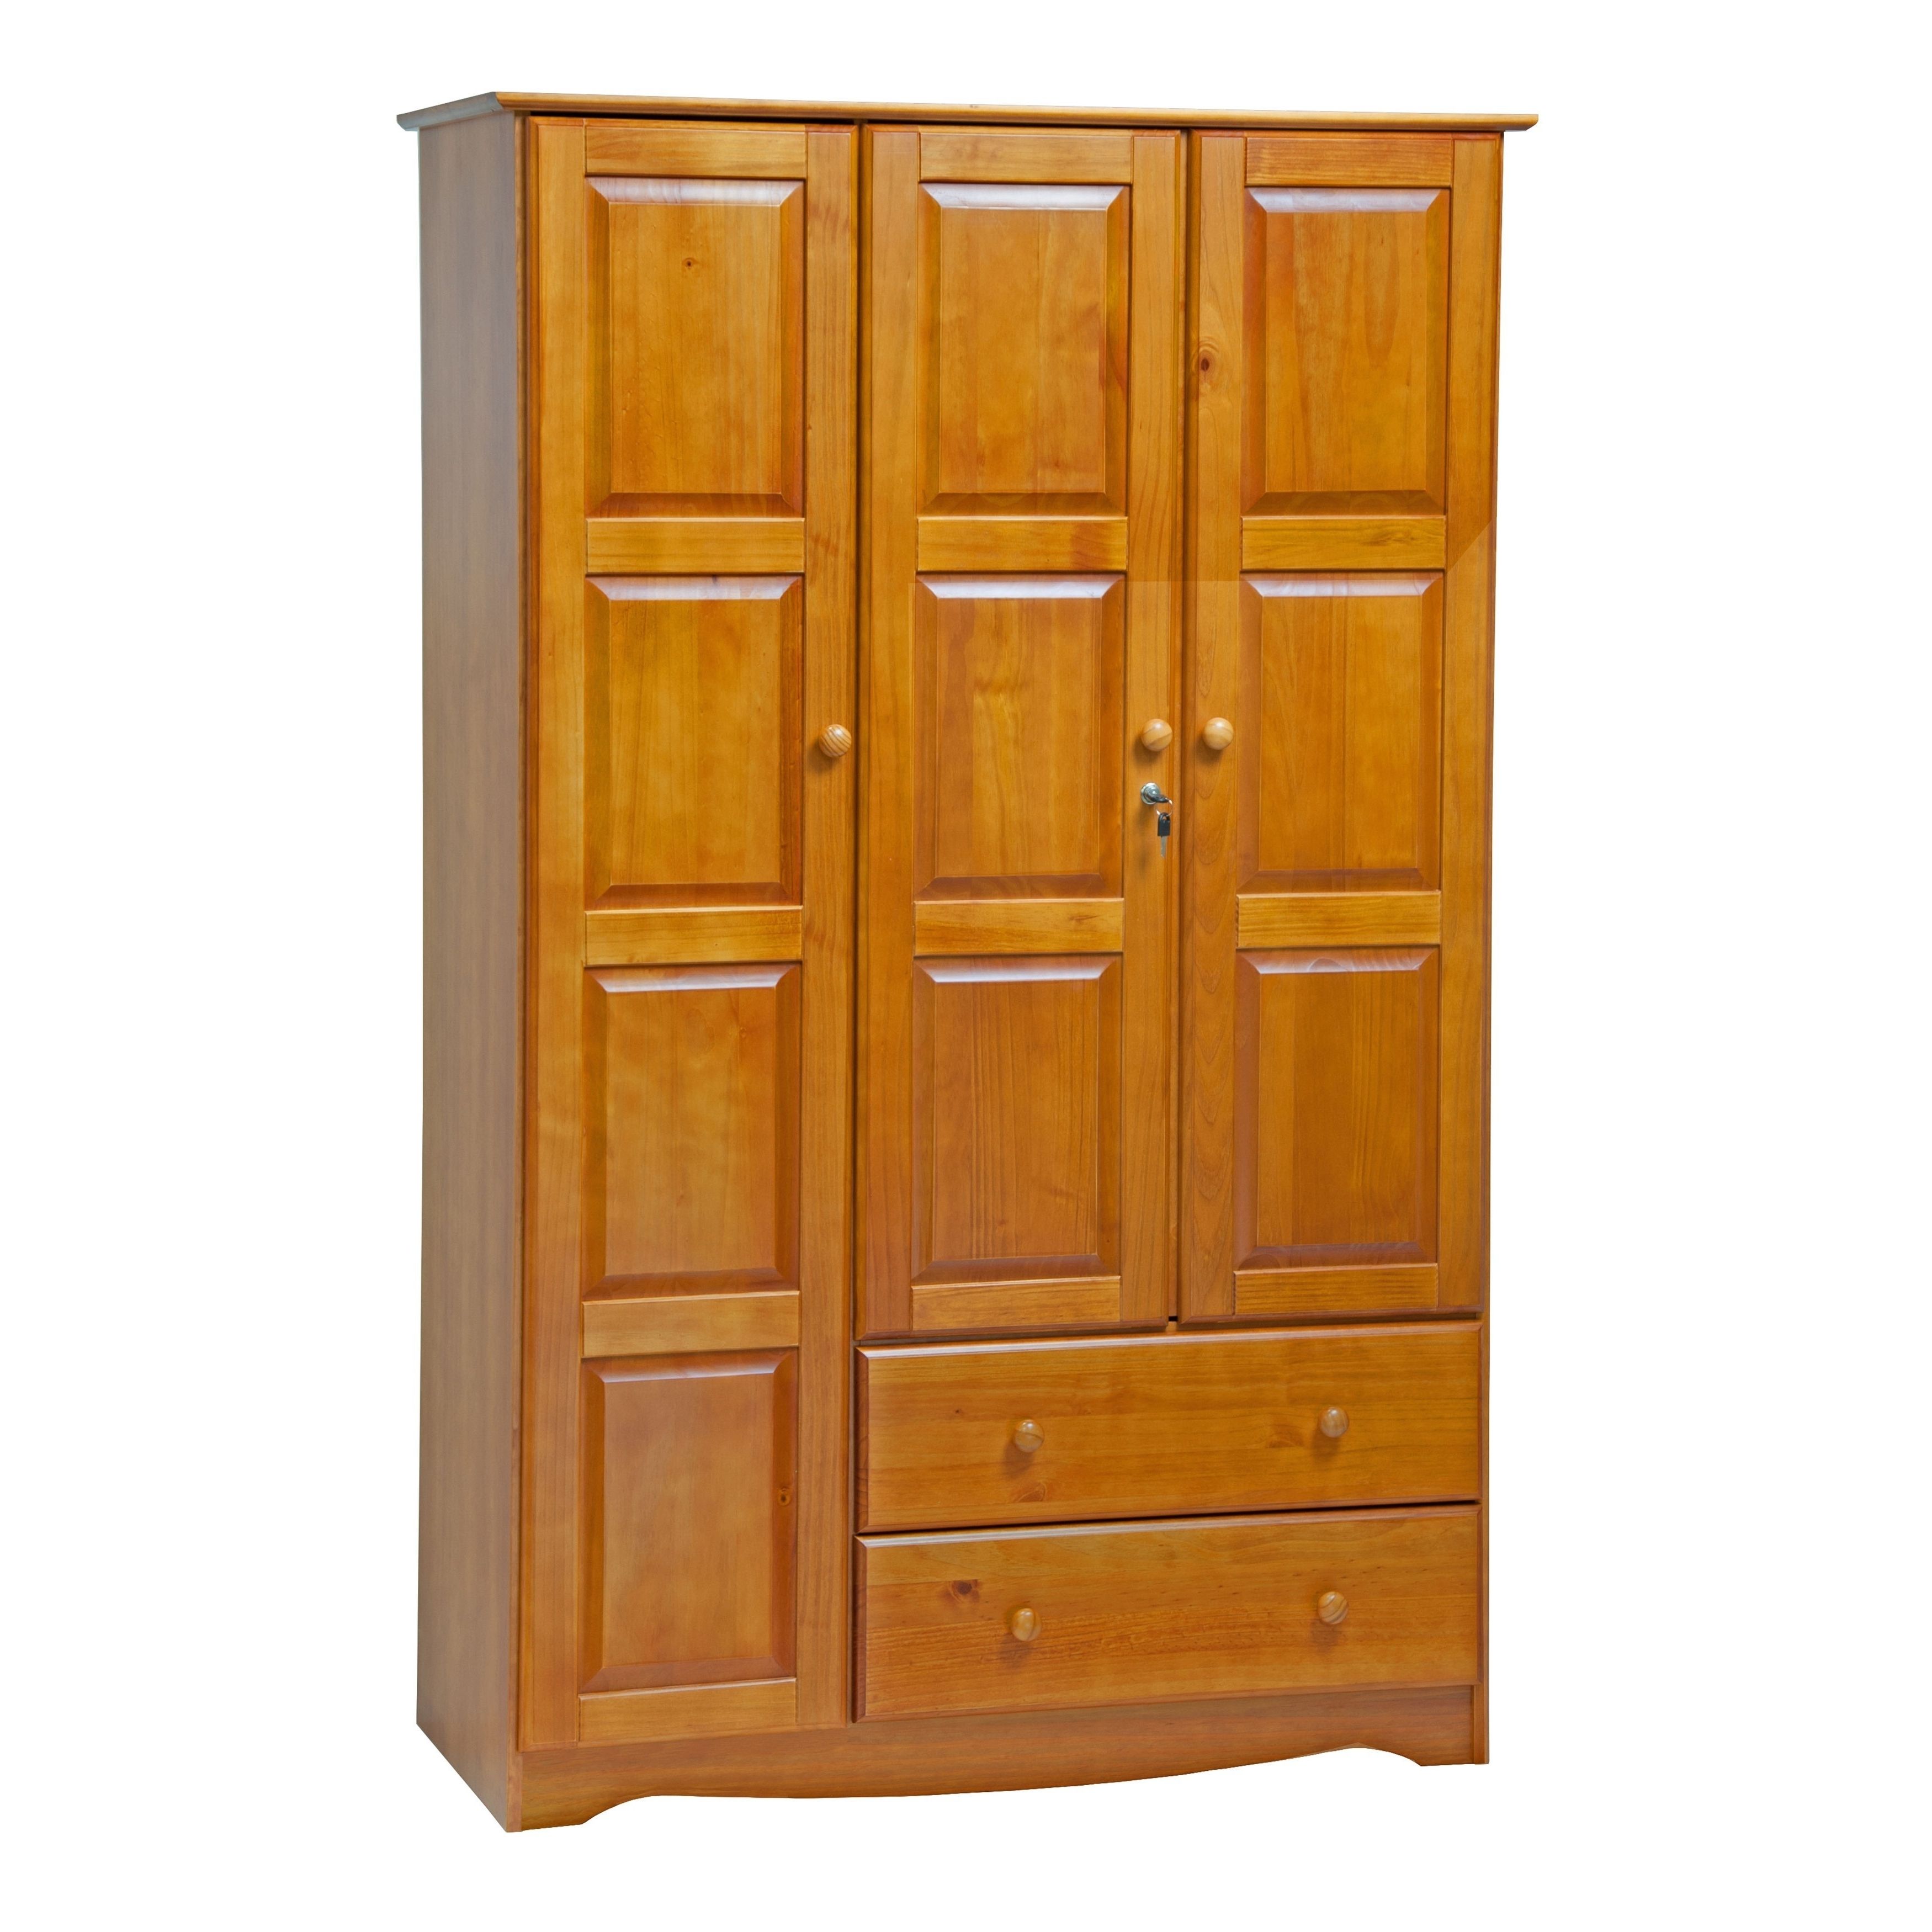 Cheap Solid Wood Wardrobes For Most Popular Furniture : Solid Wood Armoire Closet White Mirrored Wardrobe Wood (View 13 of 15)